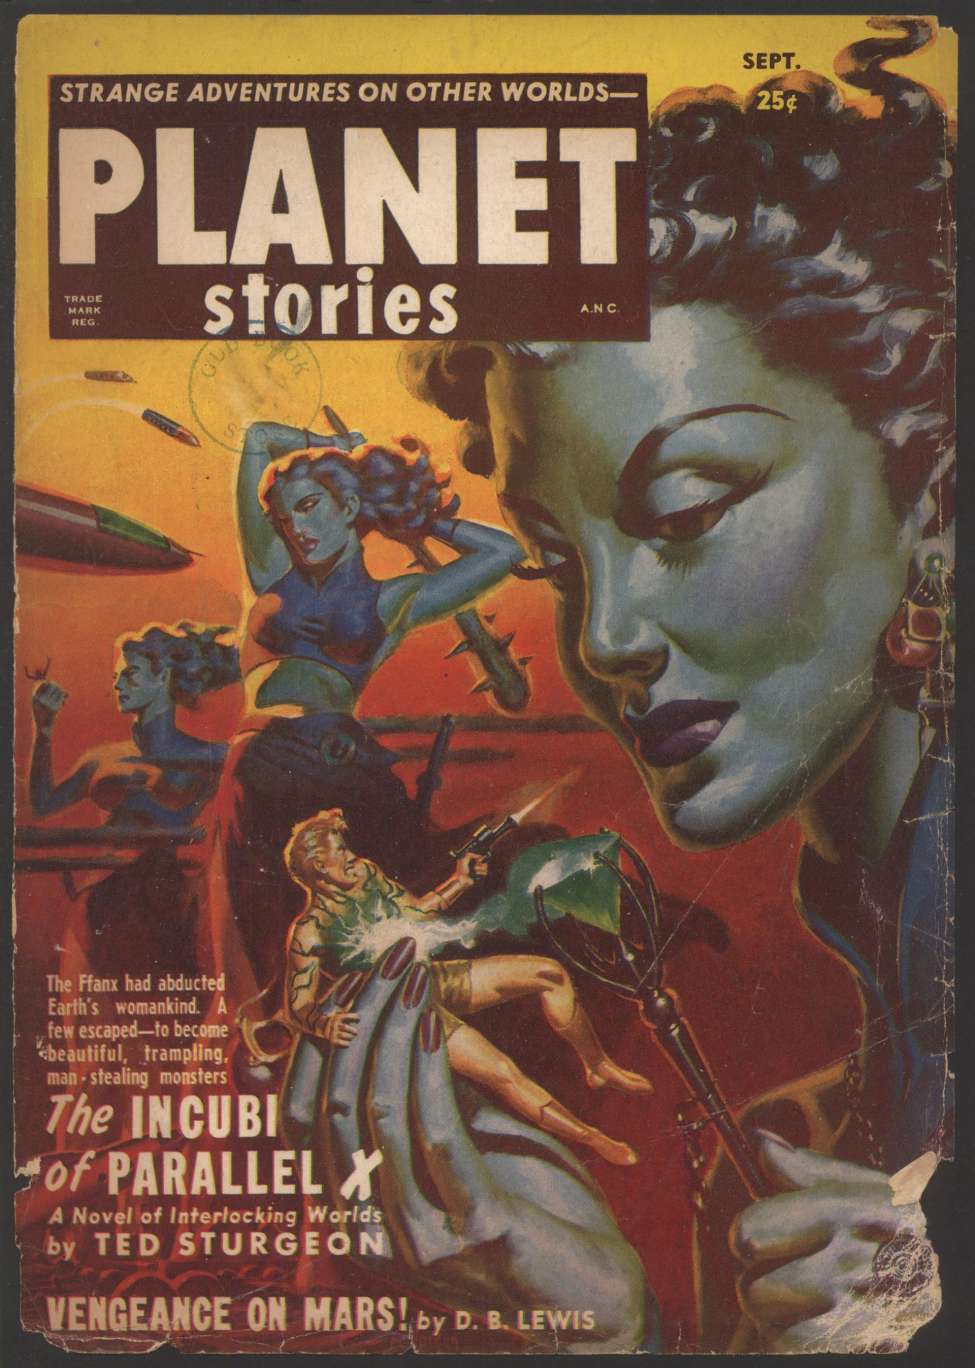 Comic Book Cover For Planet Stories v5 2 - The Incubi of Parallel X - Theodore Sturgeon